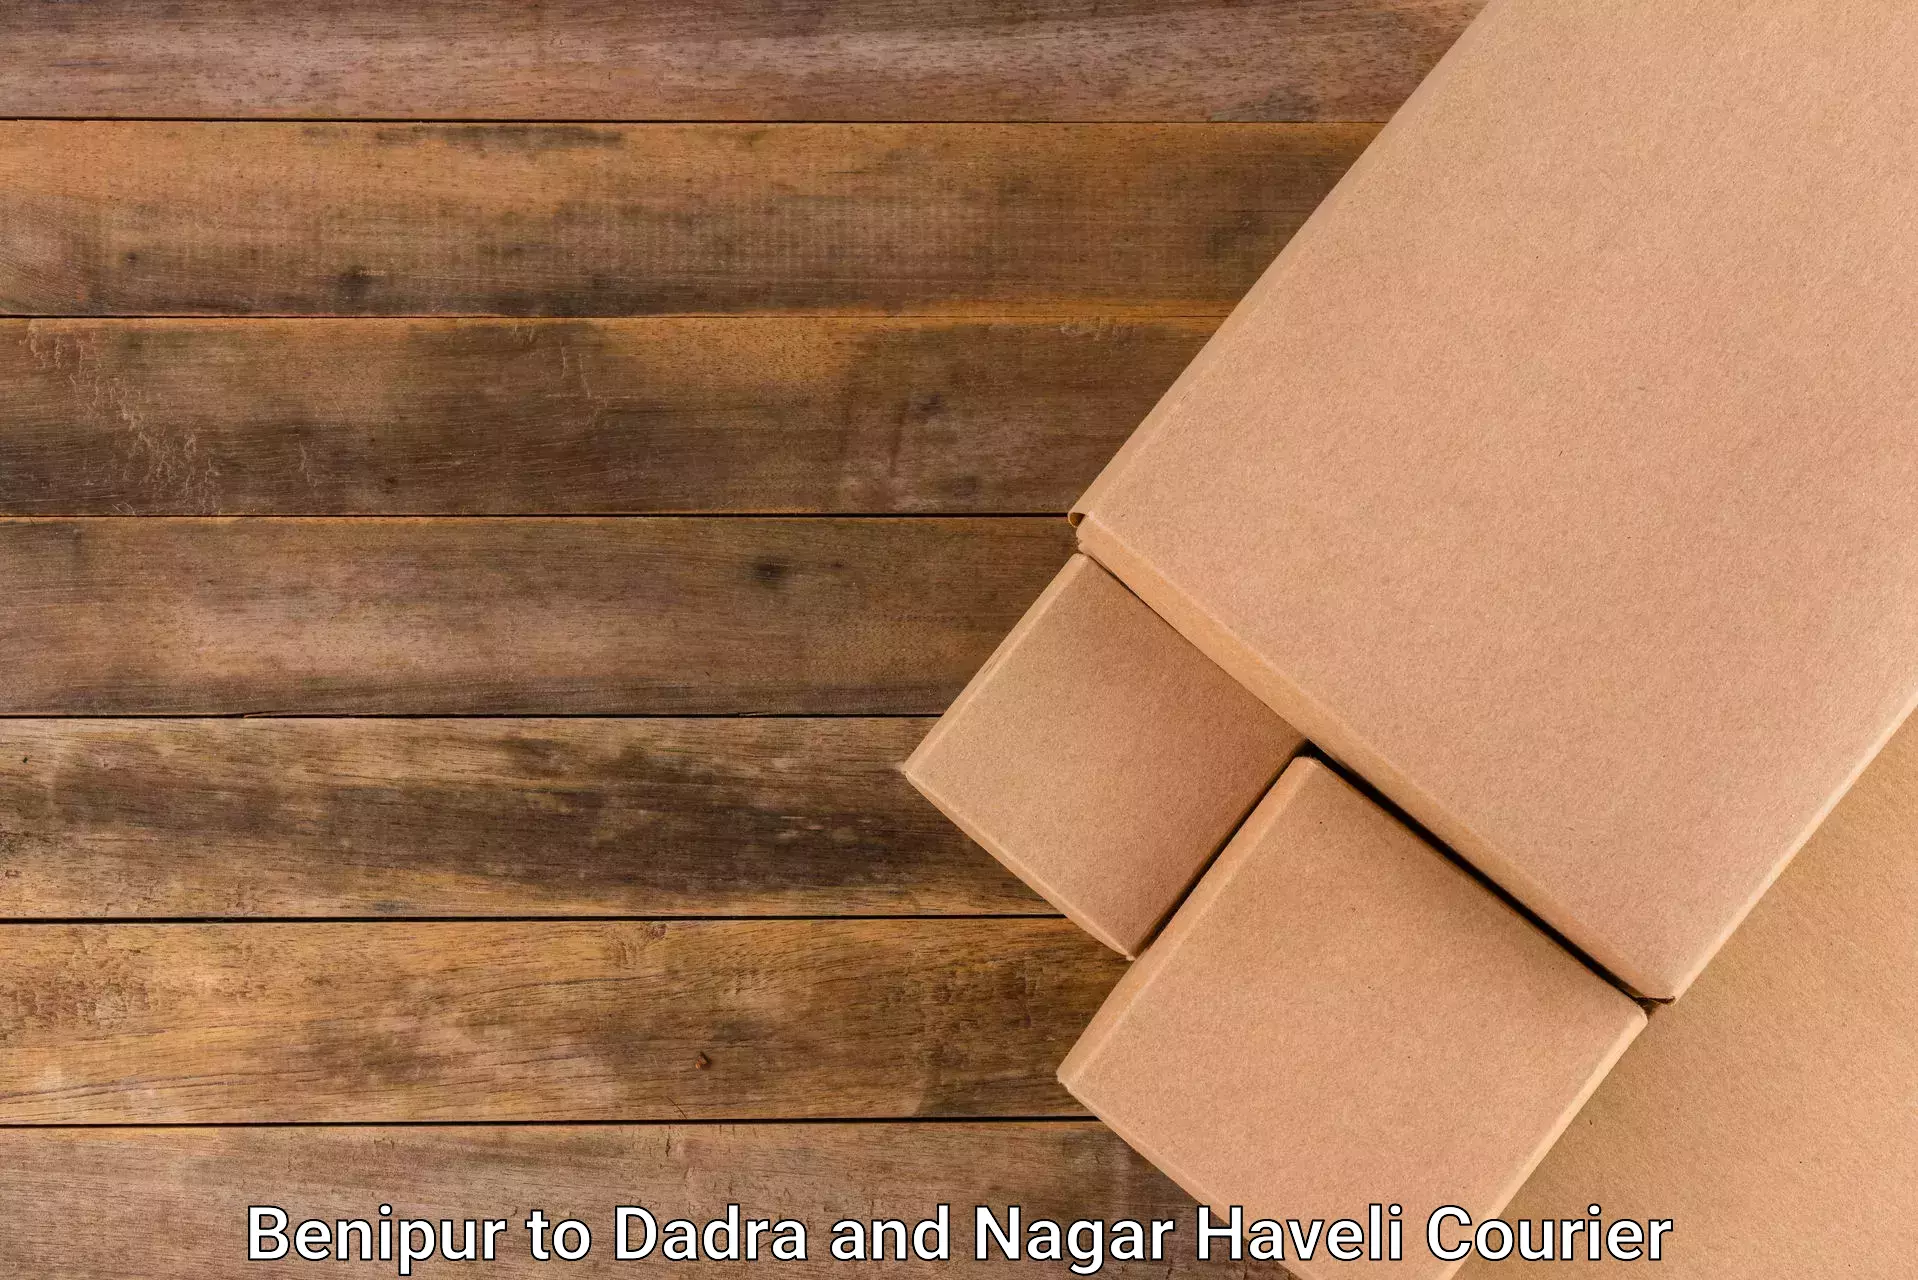 Advanced package delivery in Benipur to Dadra and Nagar Haveli